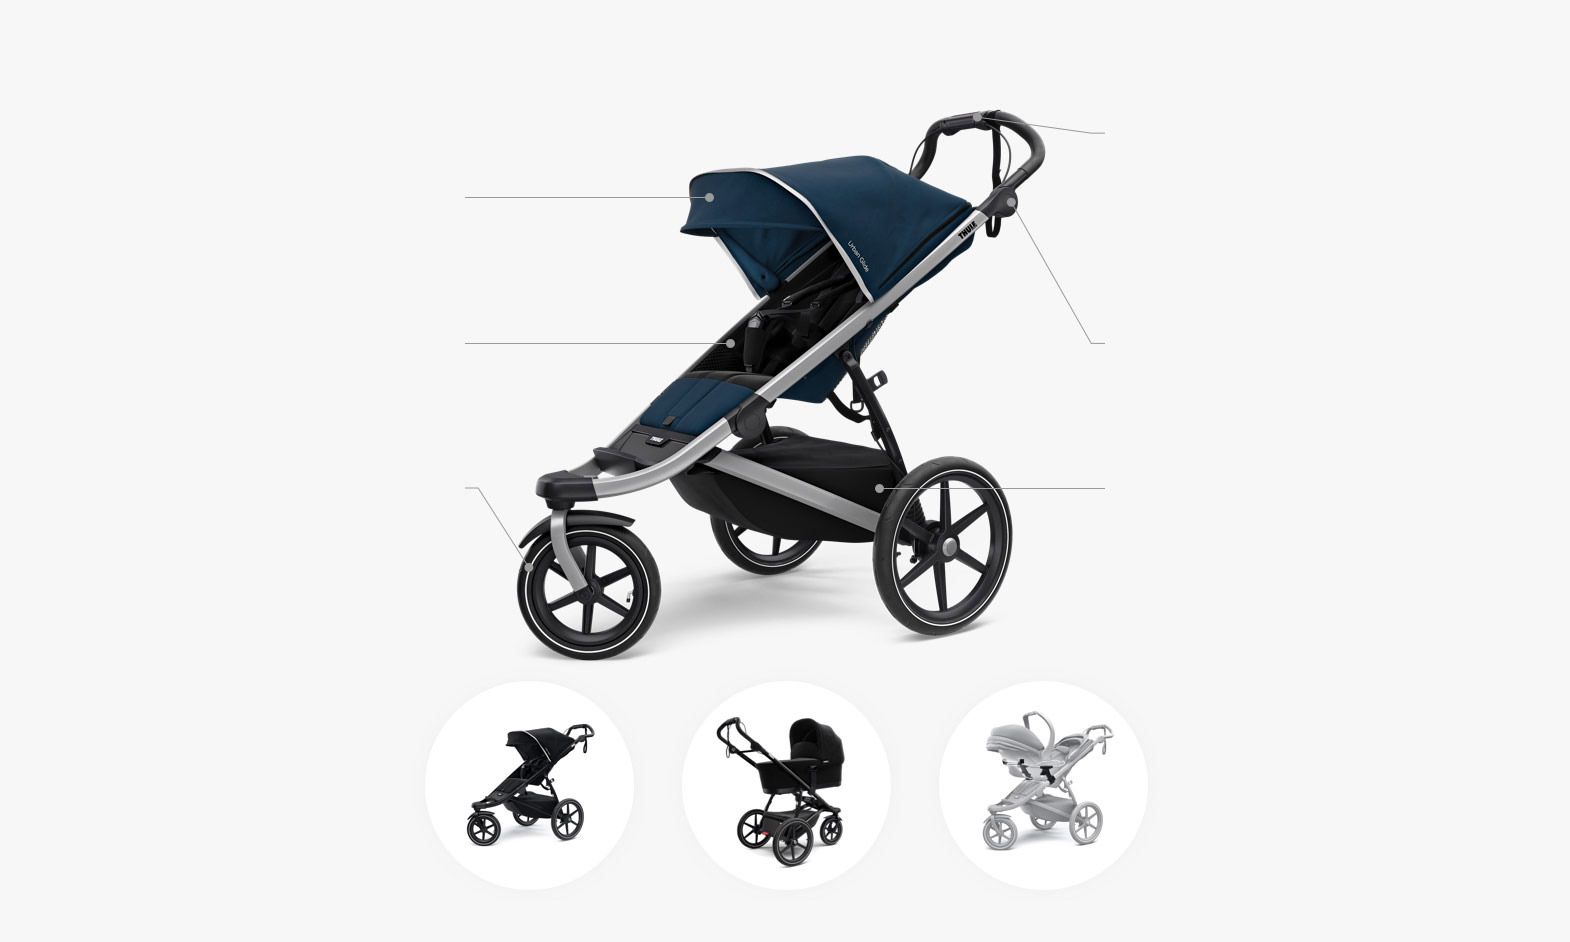 Thule Urban Glide 2 features.